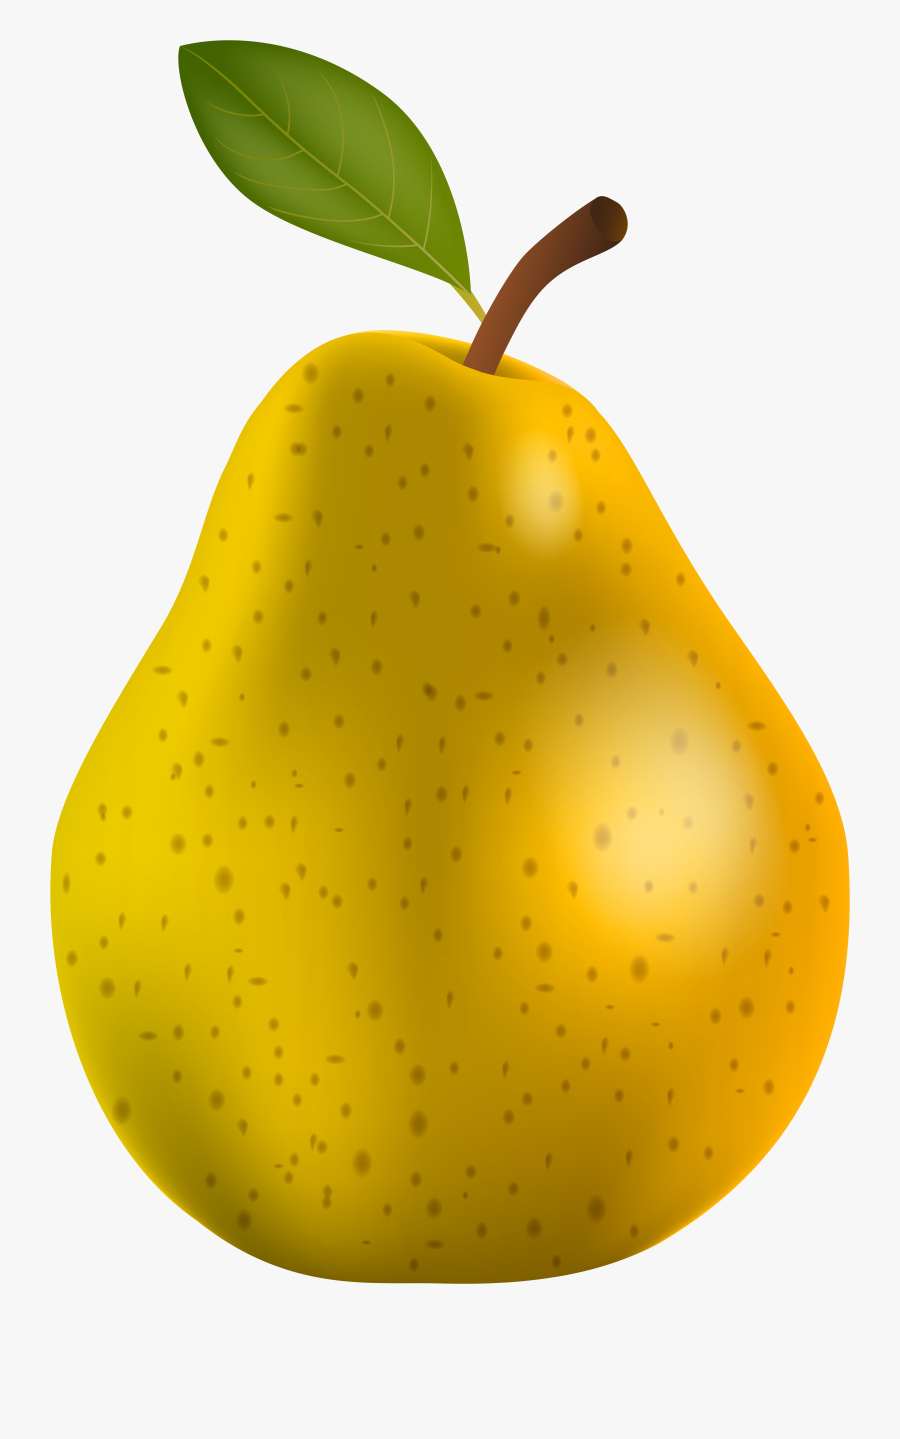 Clipart Of A Pear, Transparent Clipart